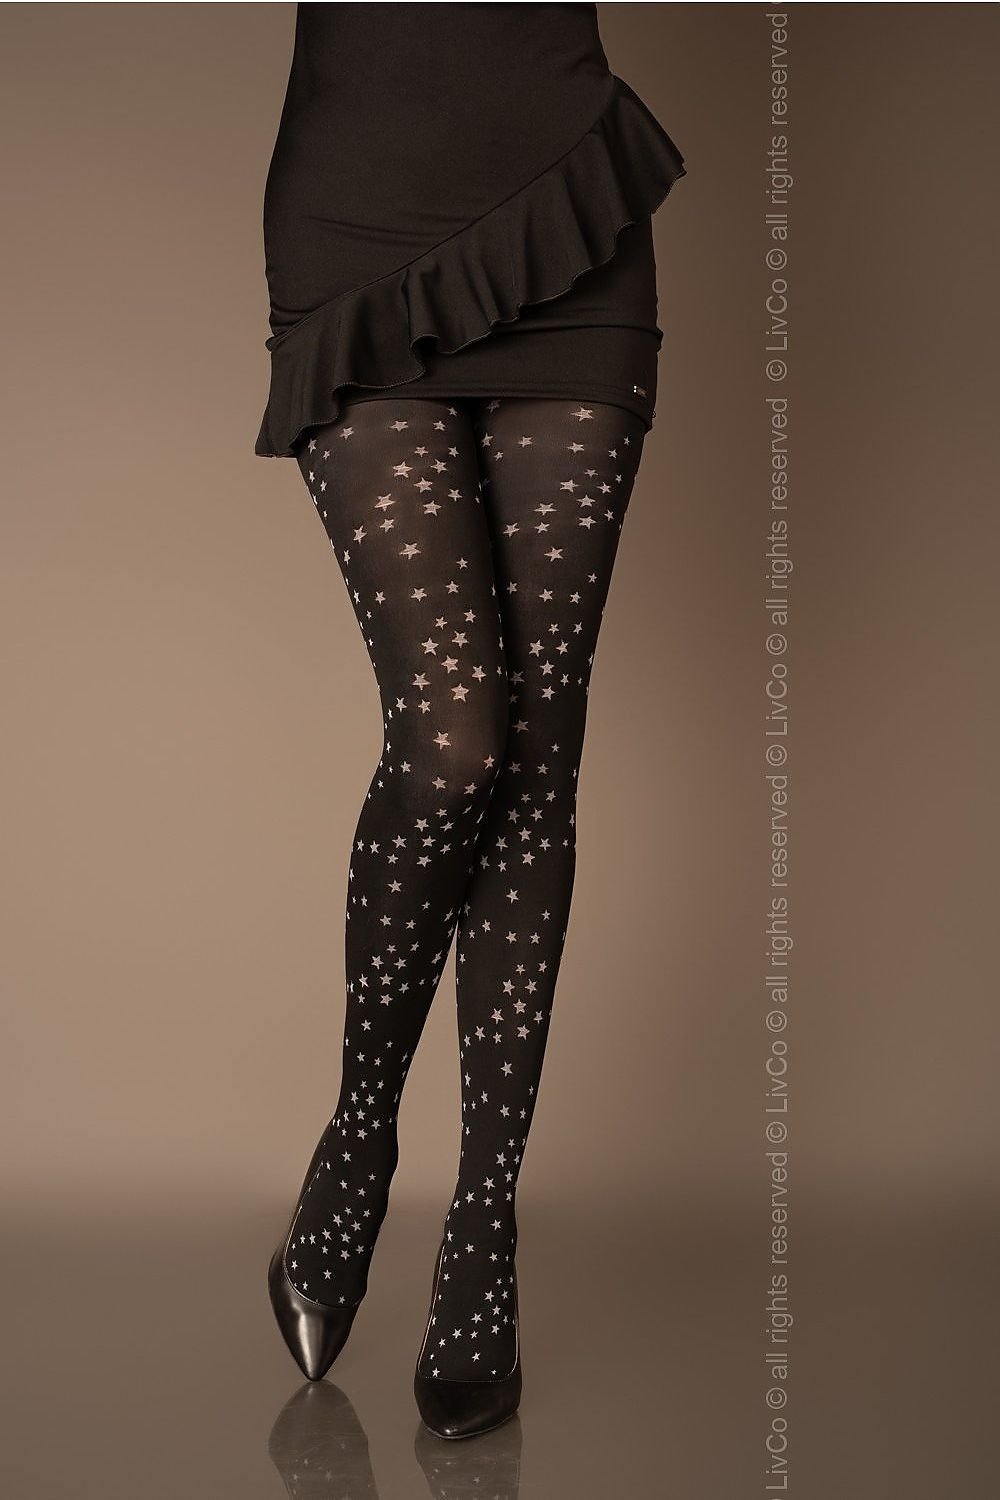 Tights styling with small charming stars